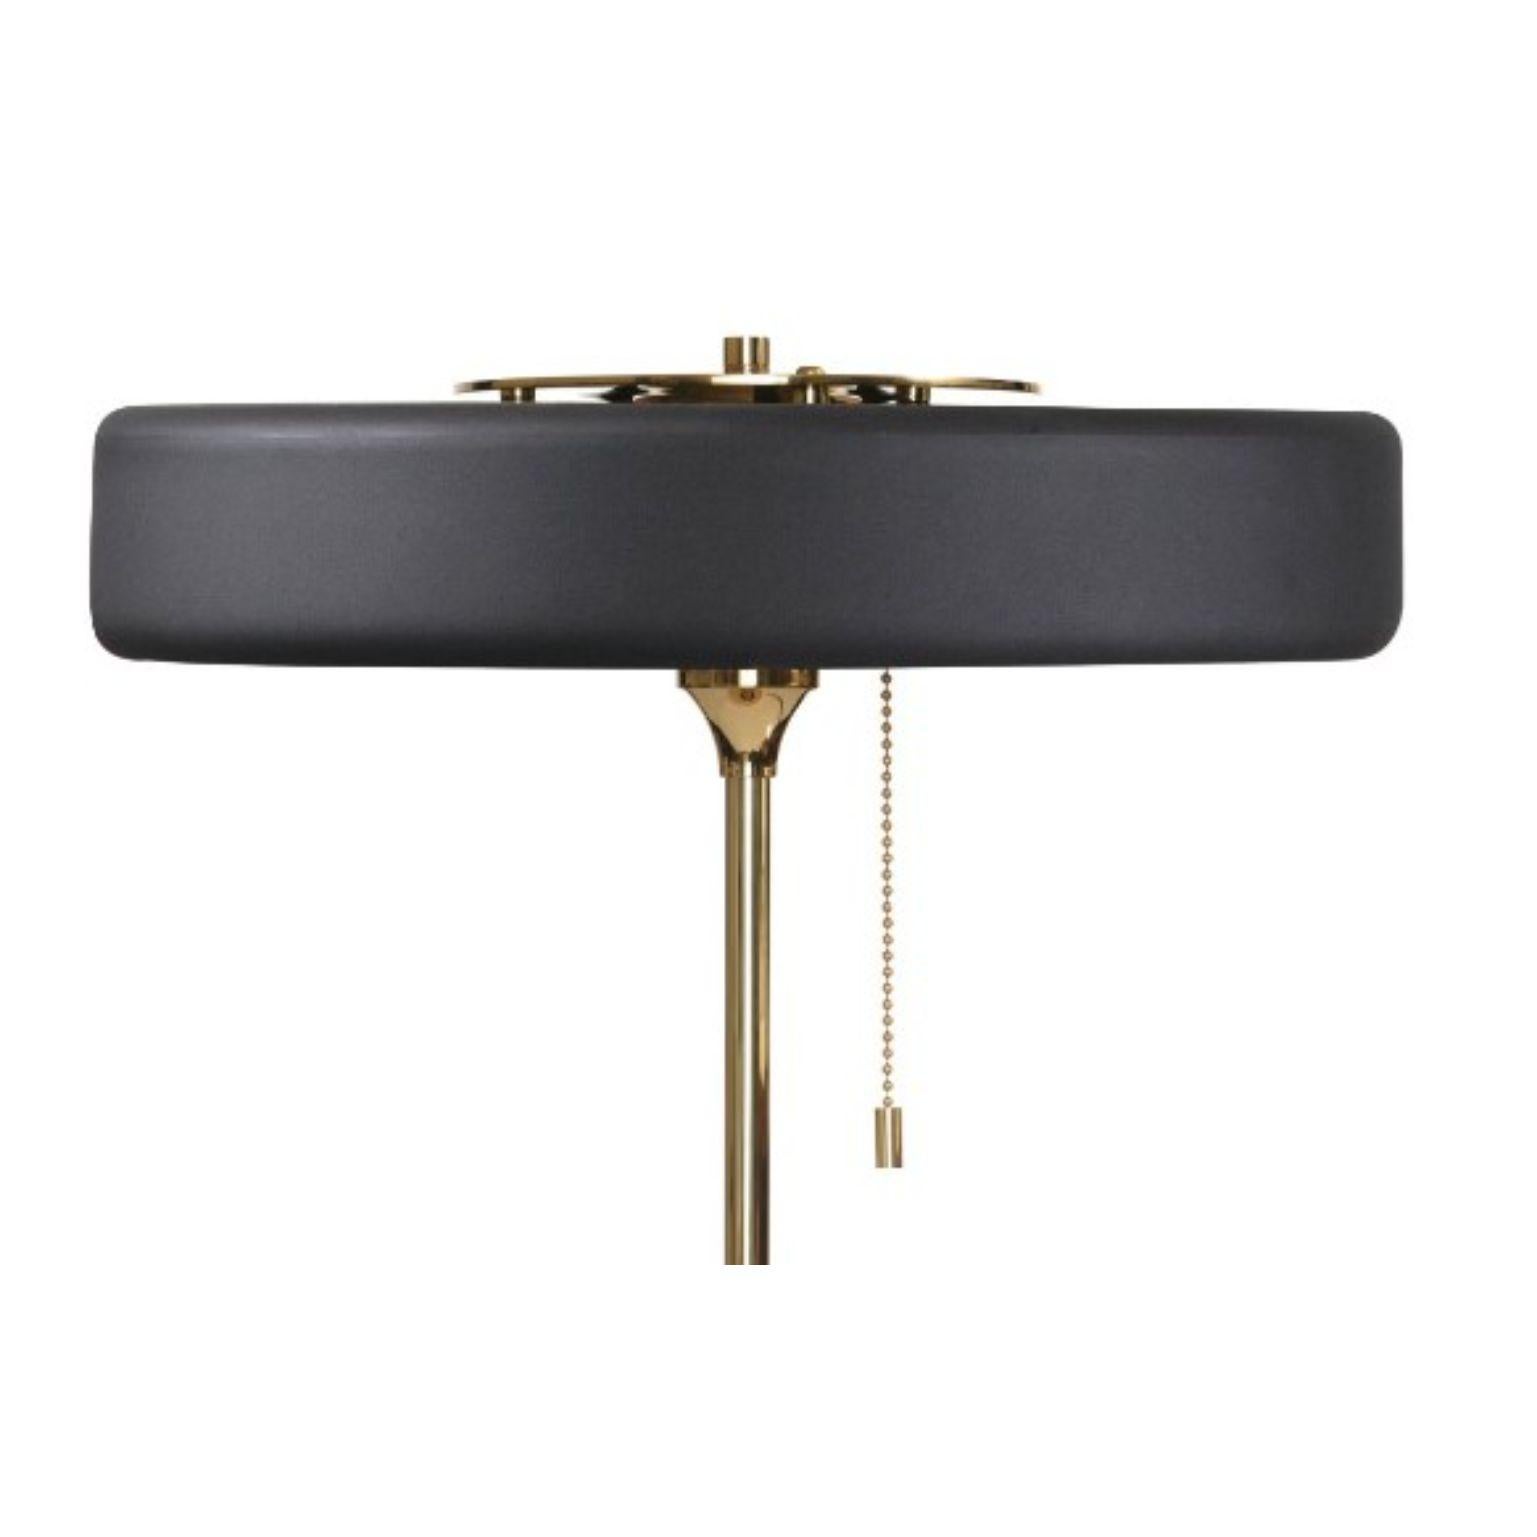 Revolve table lamp - Brushed brass - Black by Bert Frank
Dimensions: 42 x 35 x 15 cm
Materials: Brass, steel

Also available in polished brass

When Adam Yeats and Robbie Llewellyn founded Bert Frank in 2013 it was a meeting of minds and the